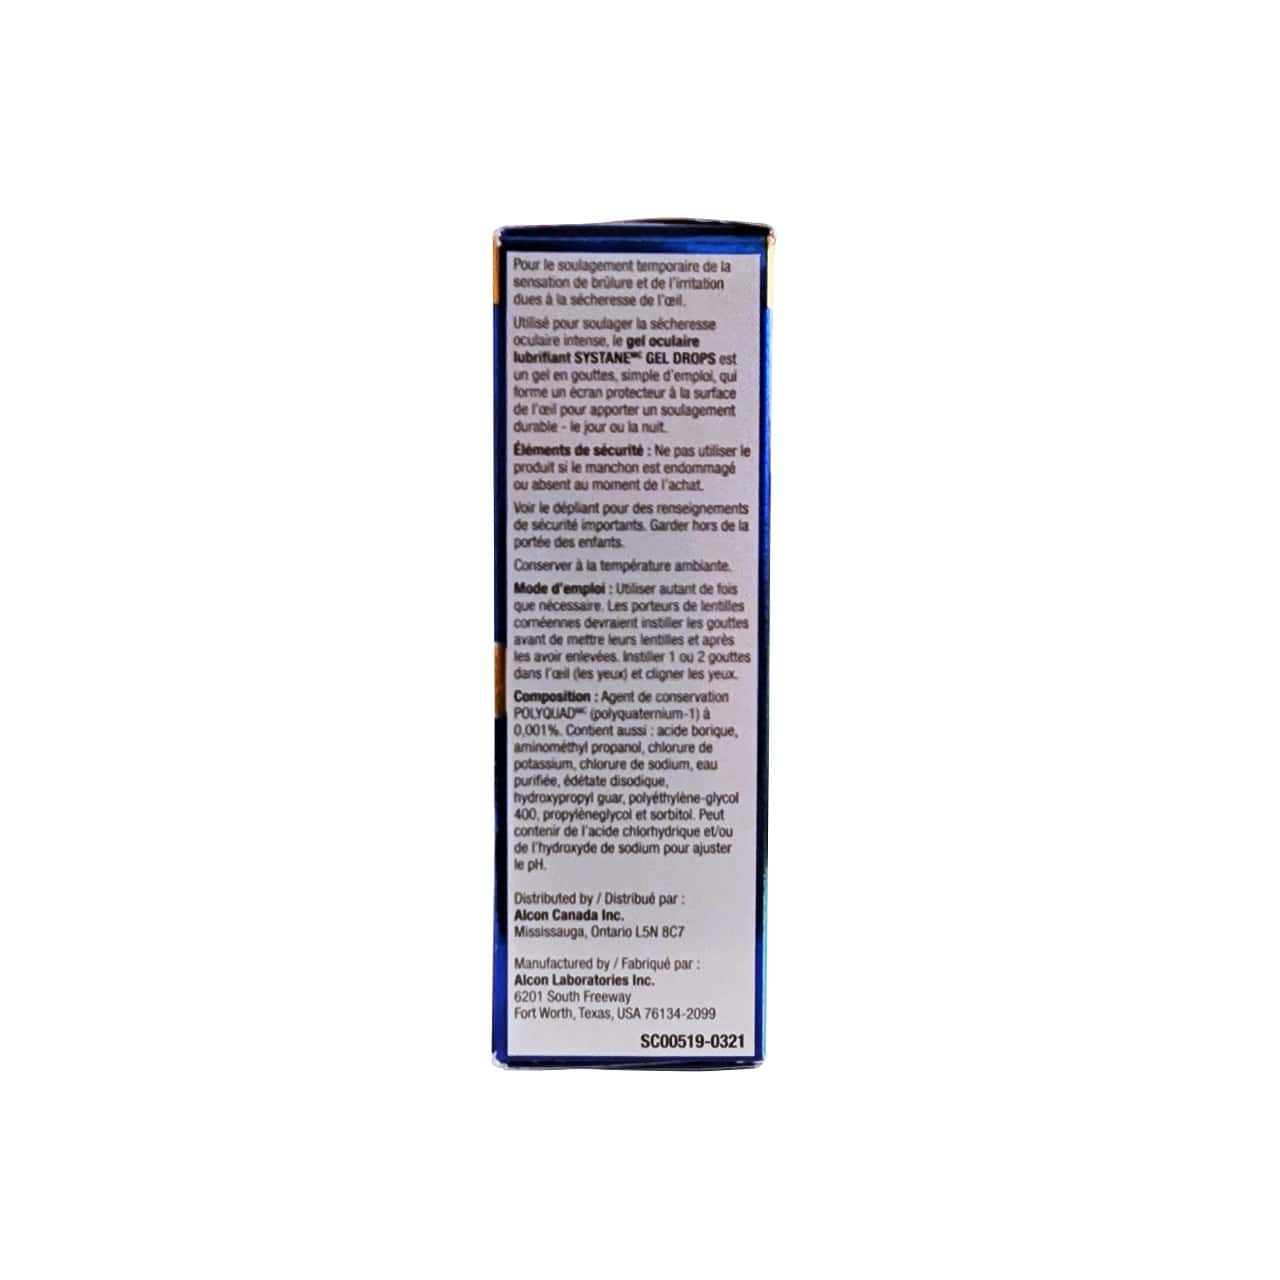 Description and directions for Alcon Systane Gel Drops Lubricant Eye Gel (2 x 10 mL) in French